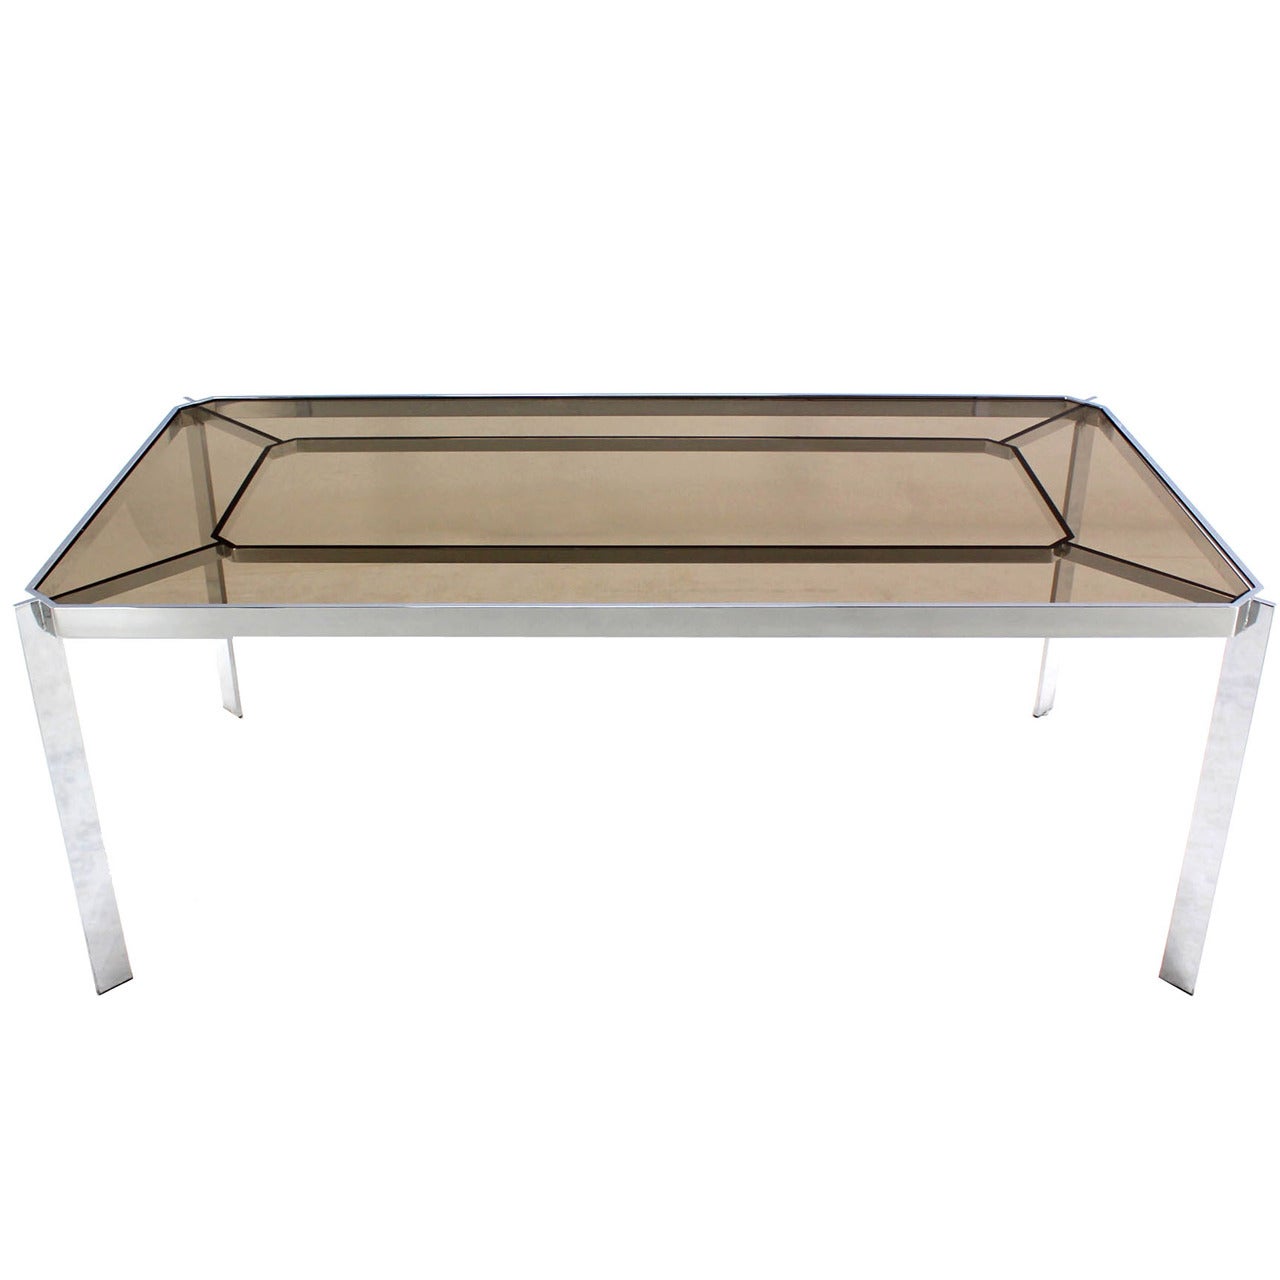 Mid-Century Modern Chrome and Smoked Glass-Top Dining Table, Style of Baughman